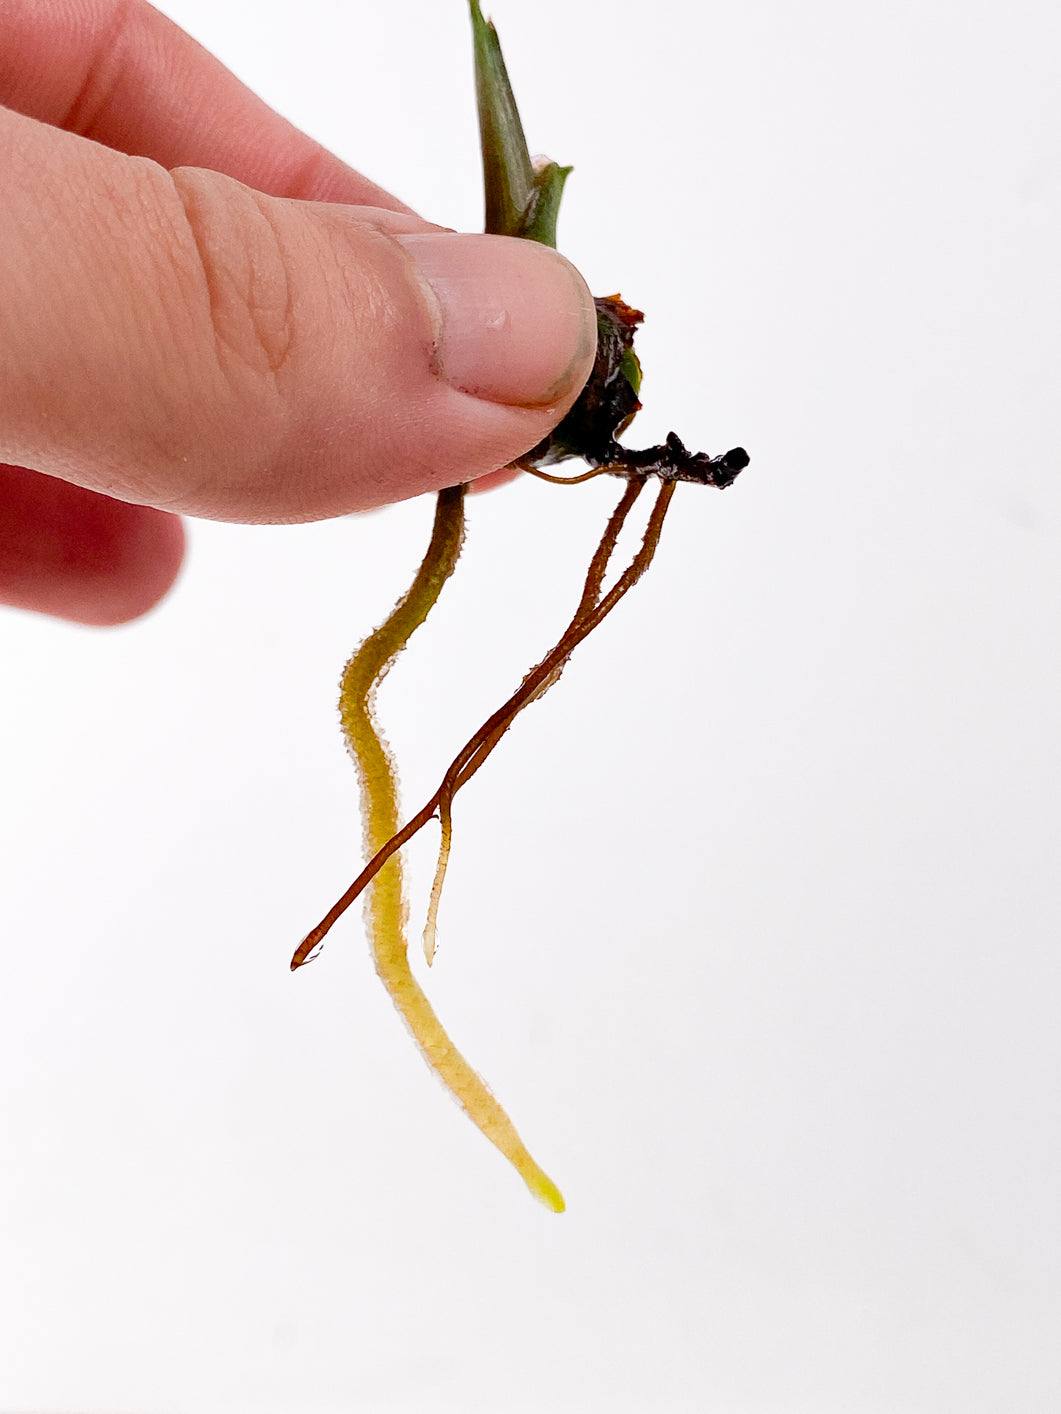 Do Not Buy Unless Authorized; Free Gift: Syngonium Strawberry Ice rooting sprout